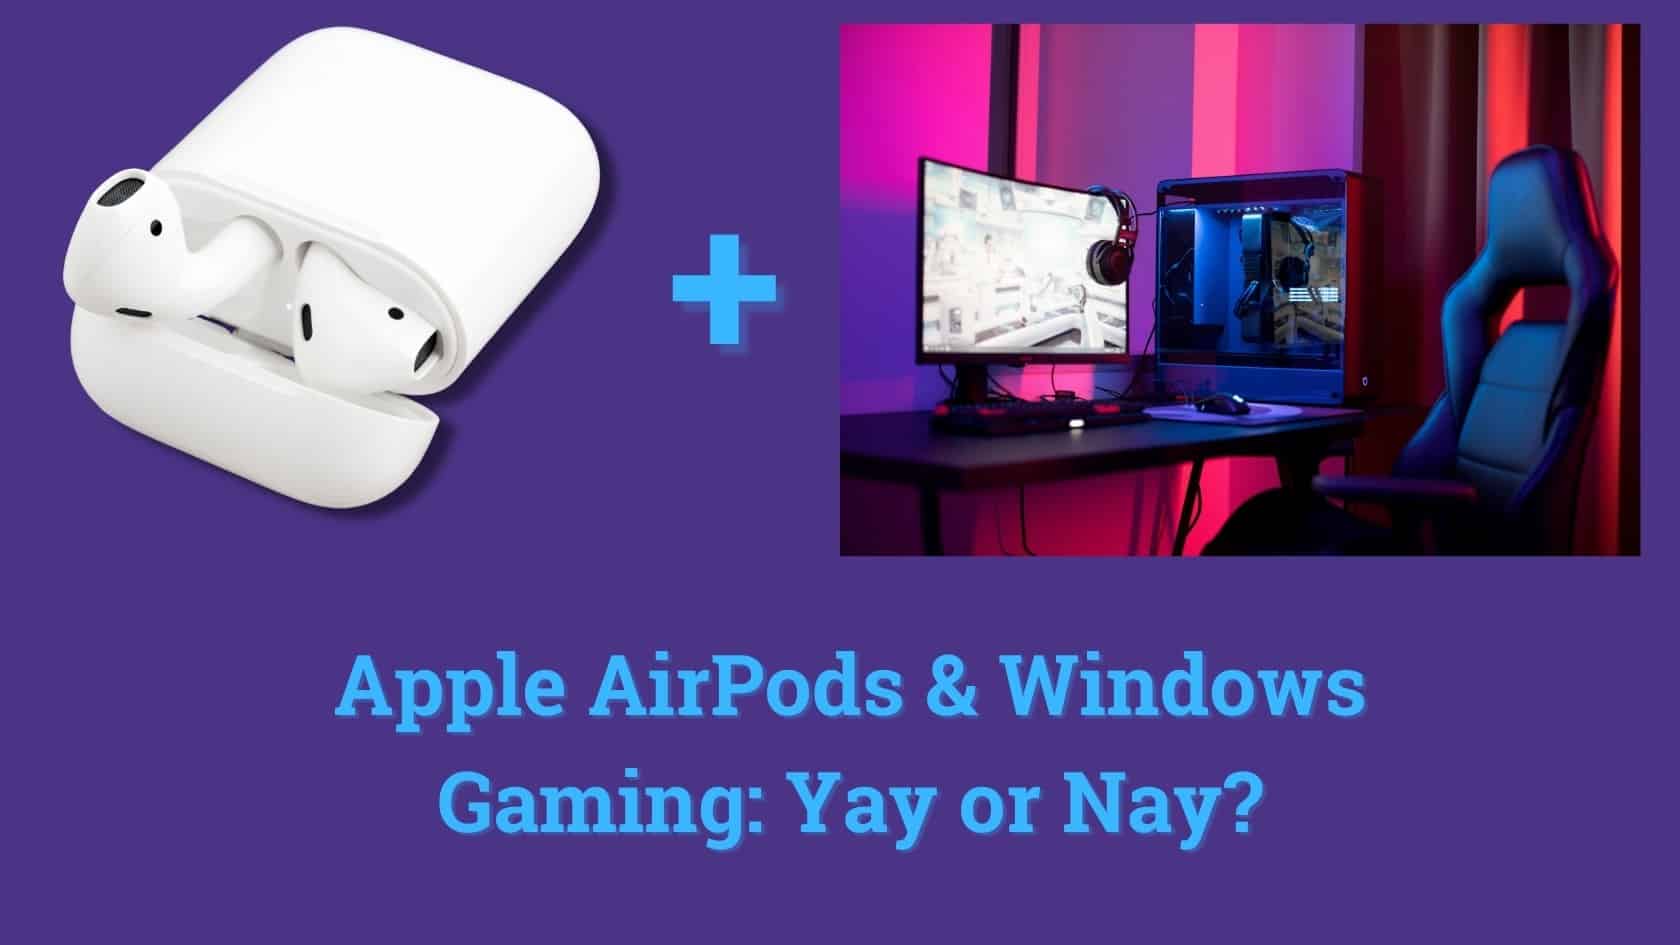 Gooey mønster hykleri Using AirPods Or AirPods Pro For PC Gaming: What To Know - Tech Overwrite